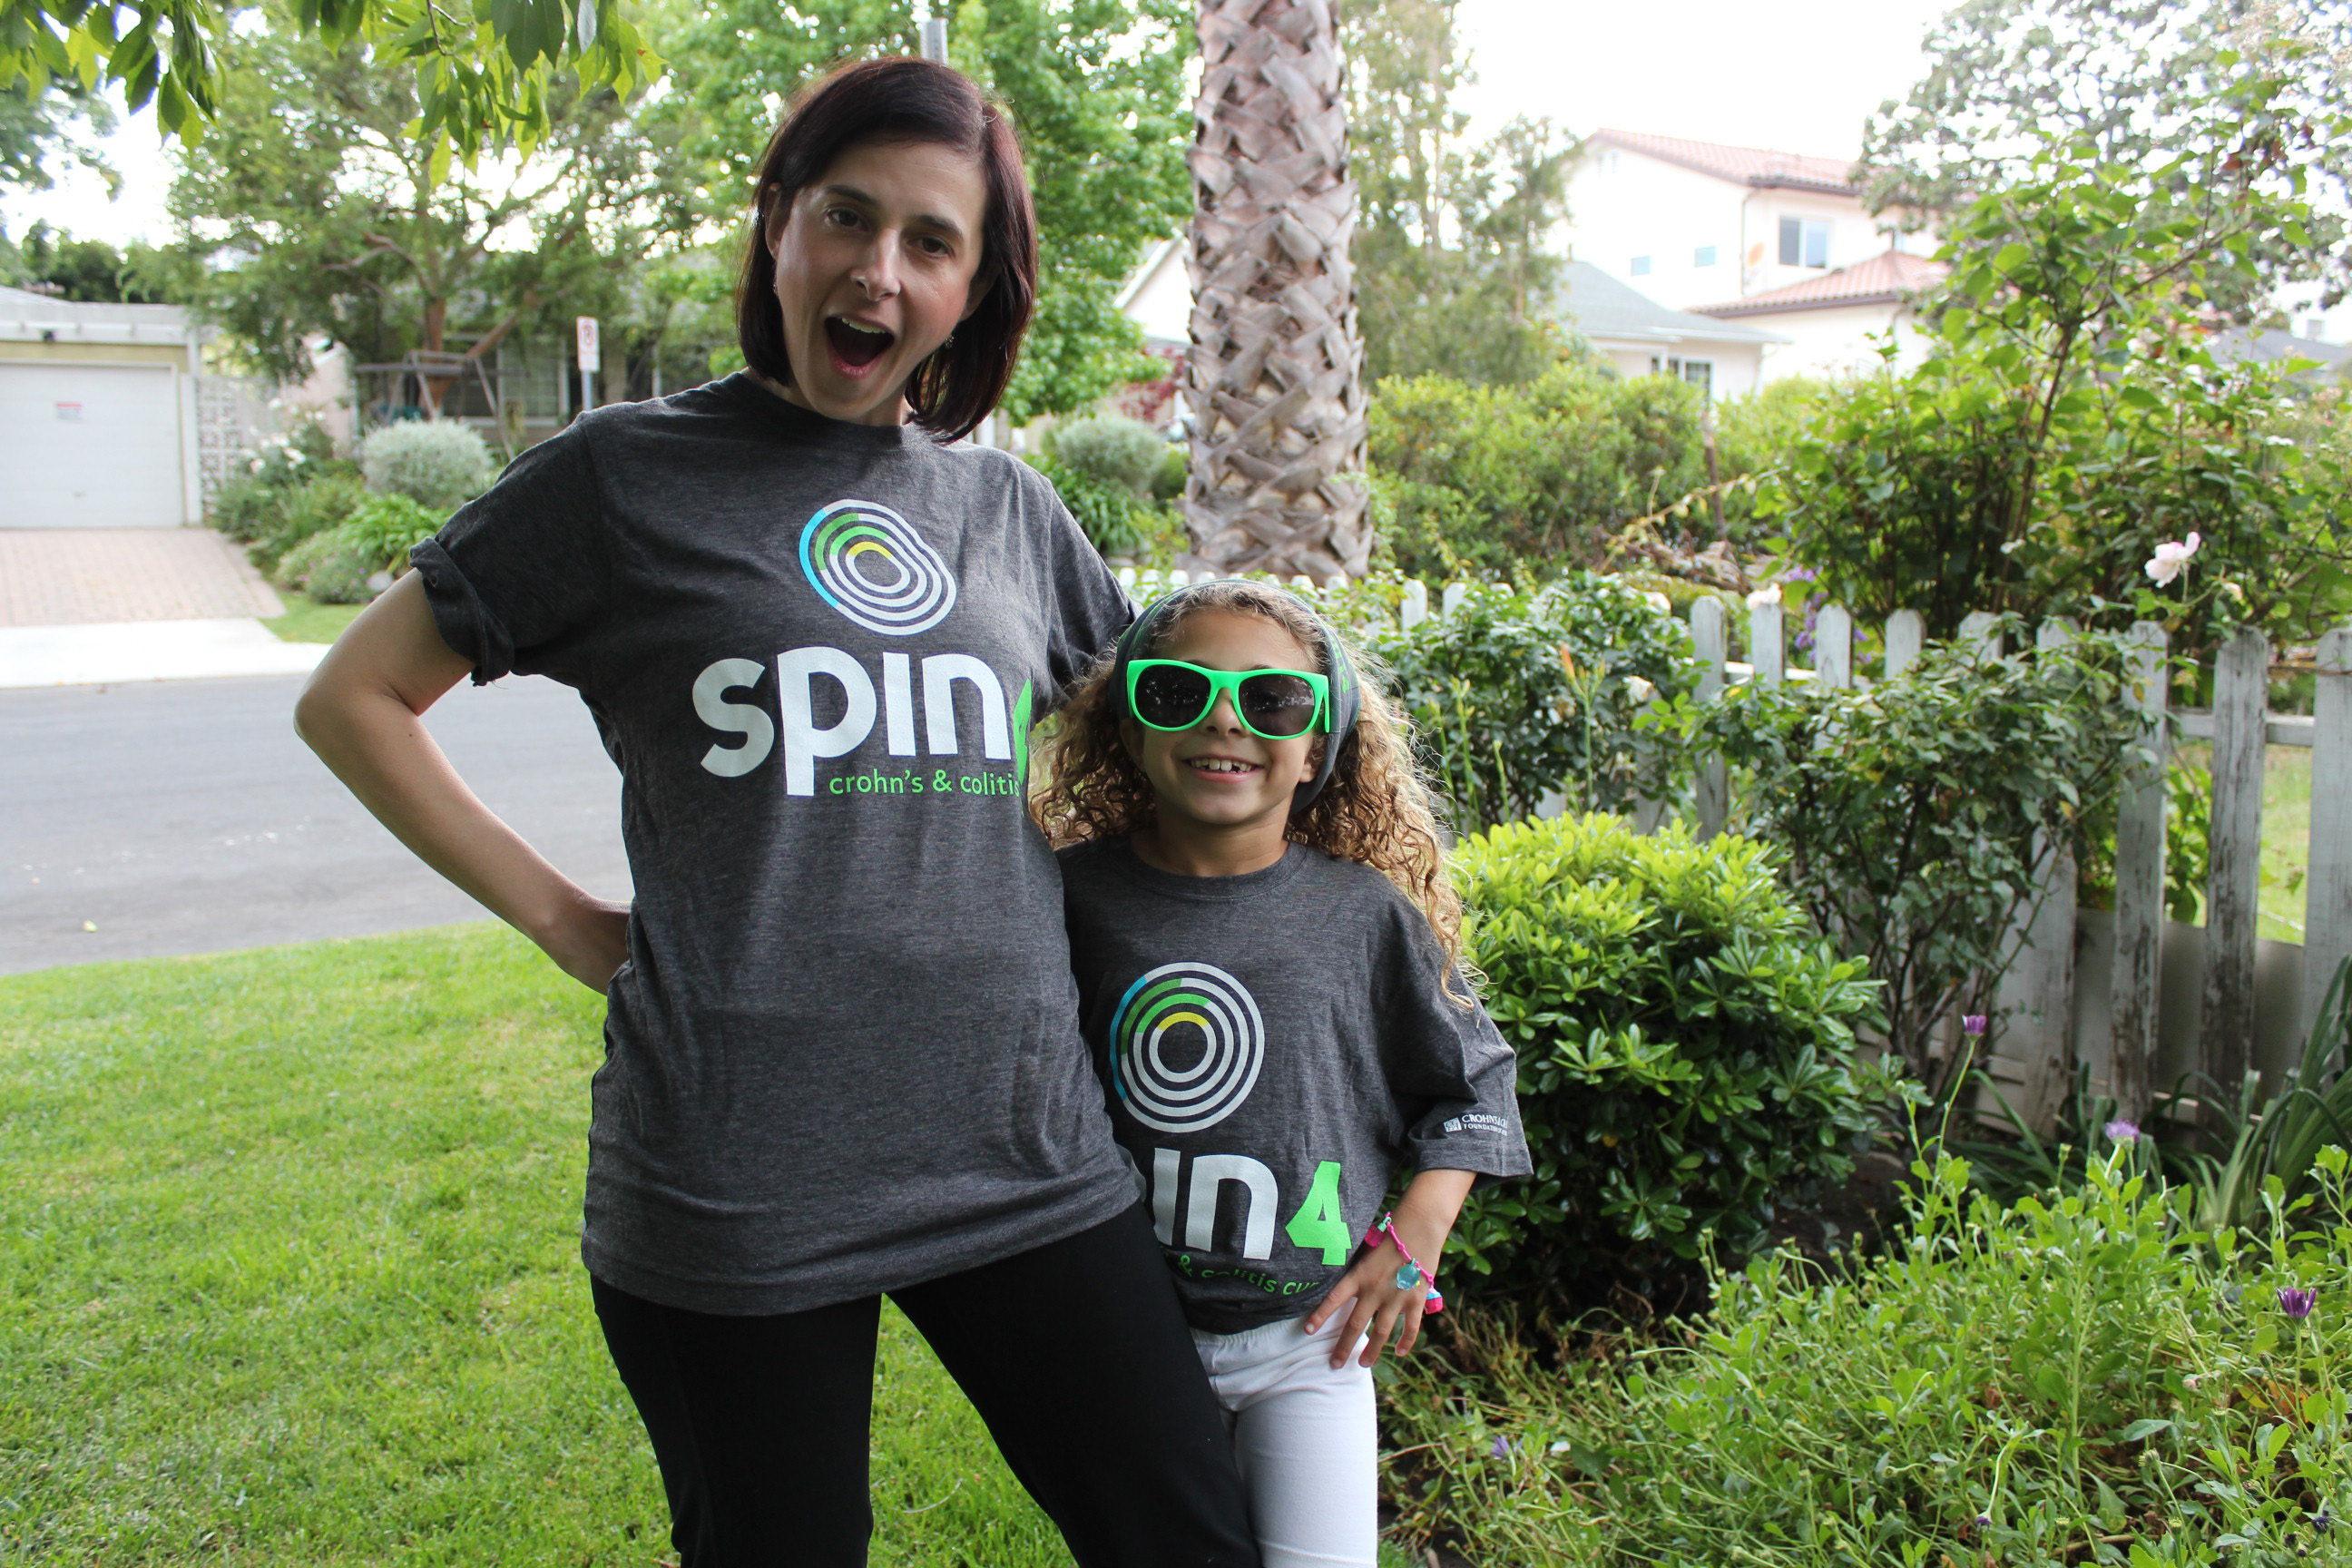 In 2015, Los Angeles resident Kelly Silk participated in spin4 crohns & colitis cures on behalf of her daughter, Ashlyn, a newly diagnosed 9-year-old ulcerative colitis patient.